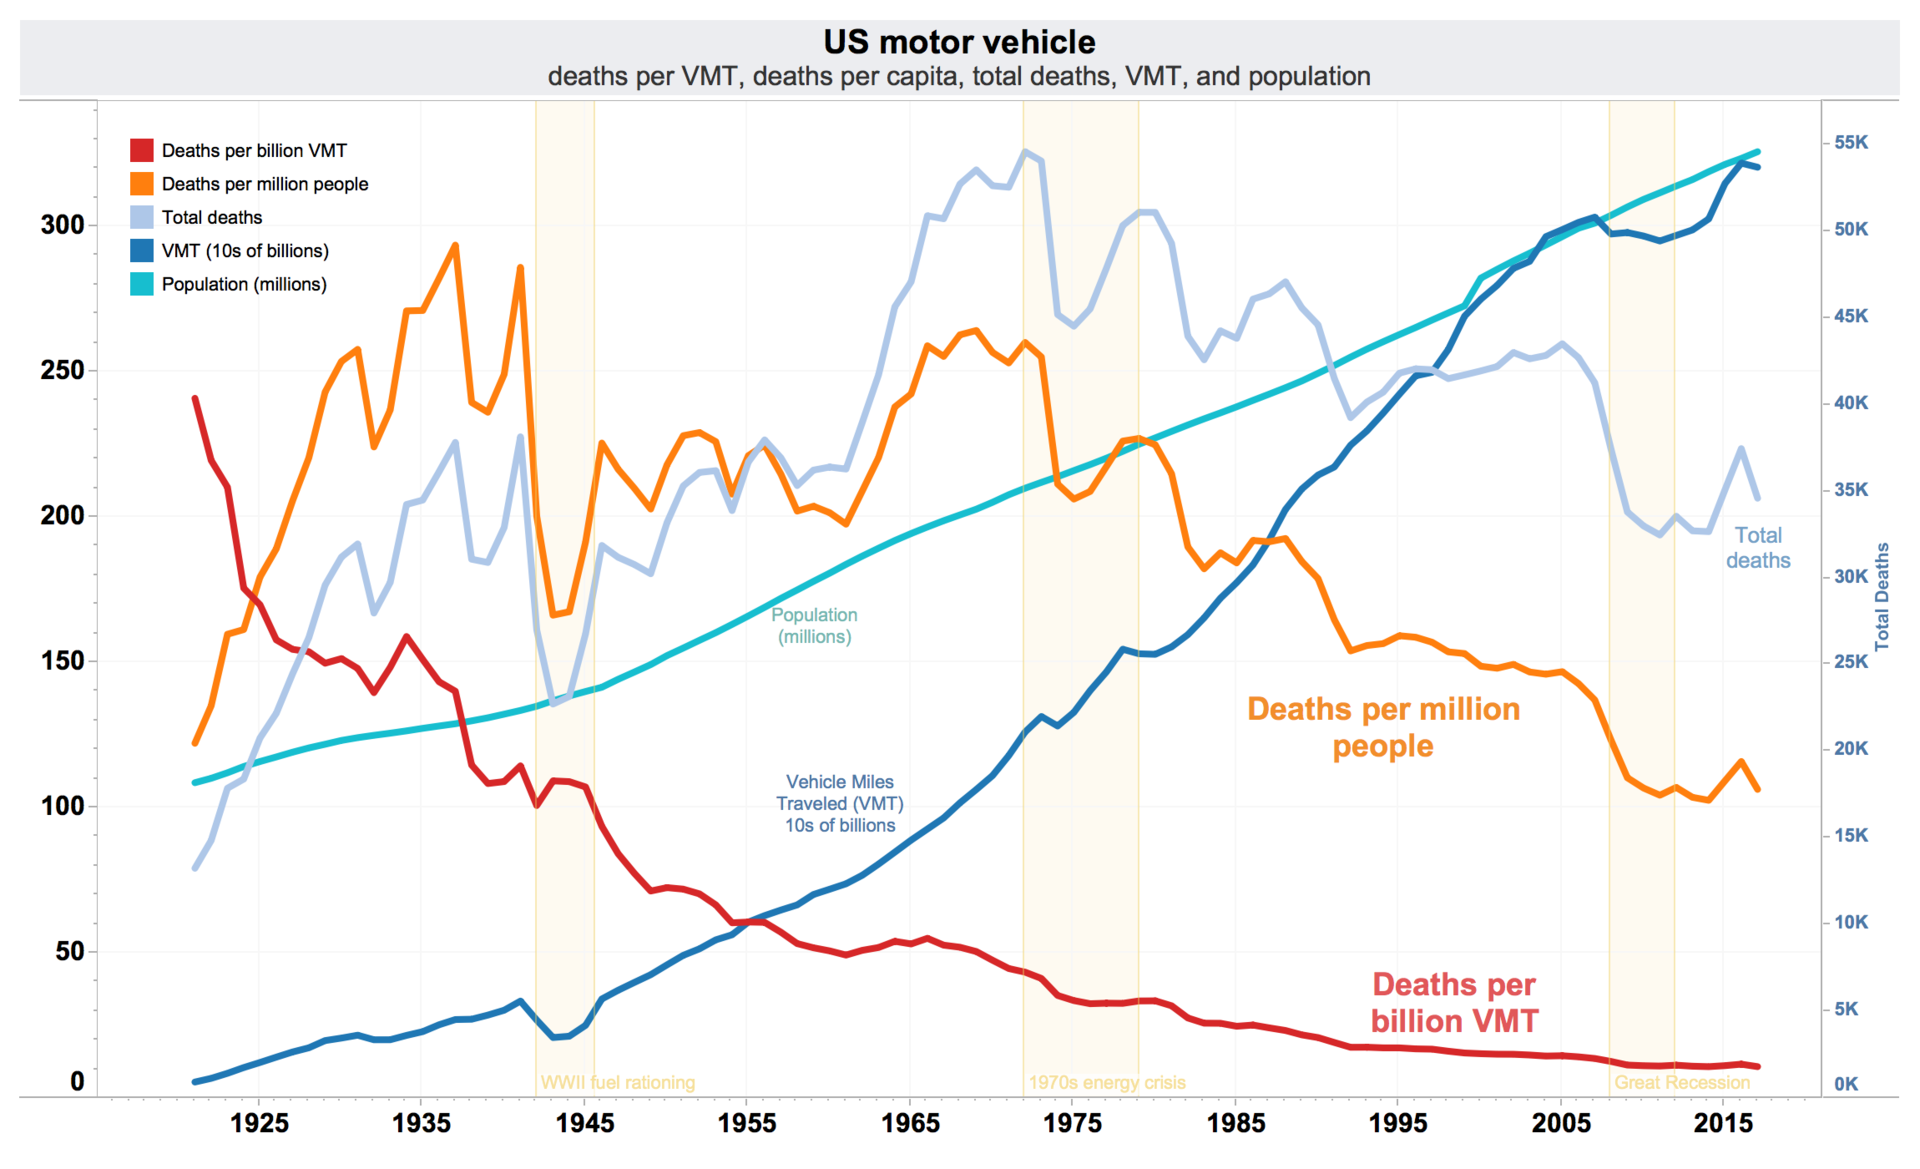 1920px-US_traffic_deaths_per_VMT%2C_VMT%2C_per_capita%2C_and_total_annual_deaths.png